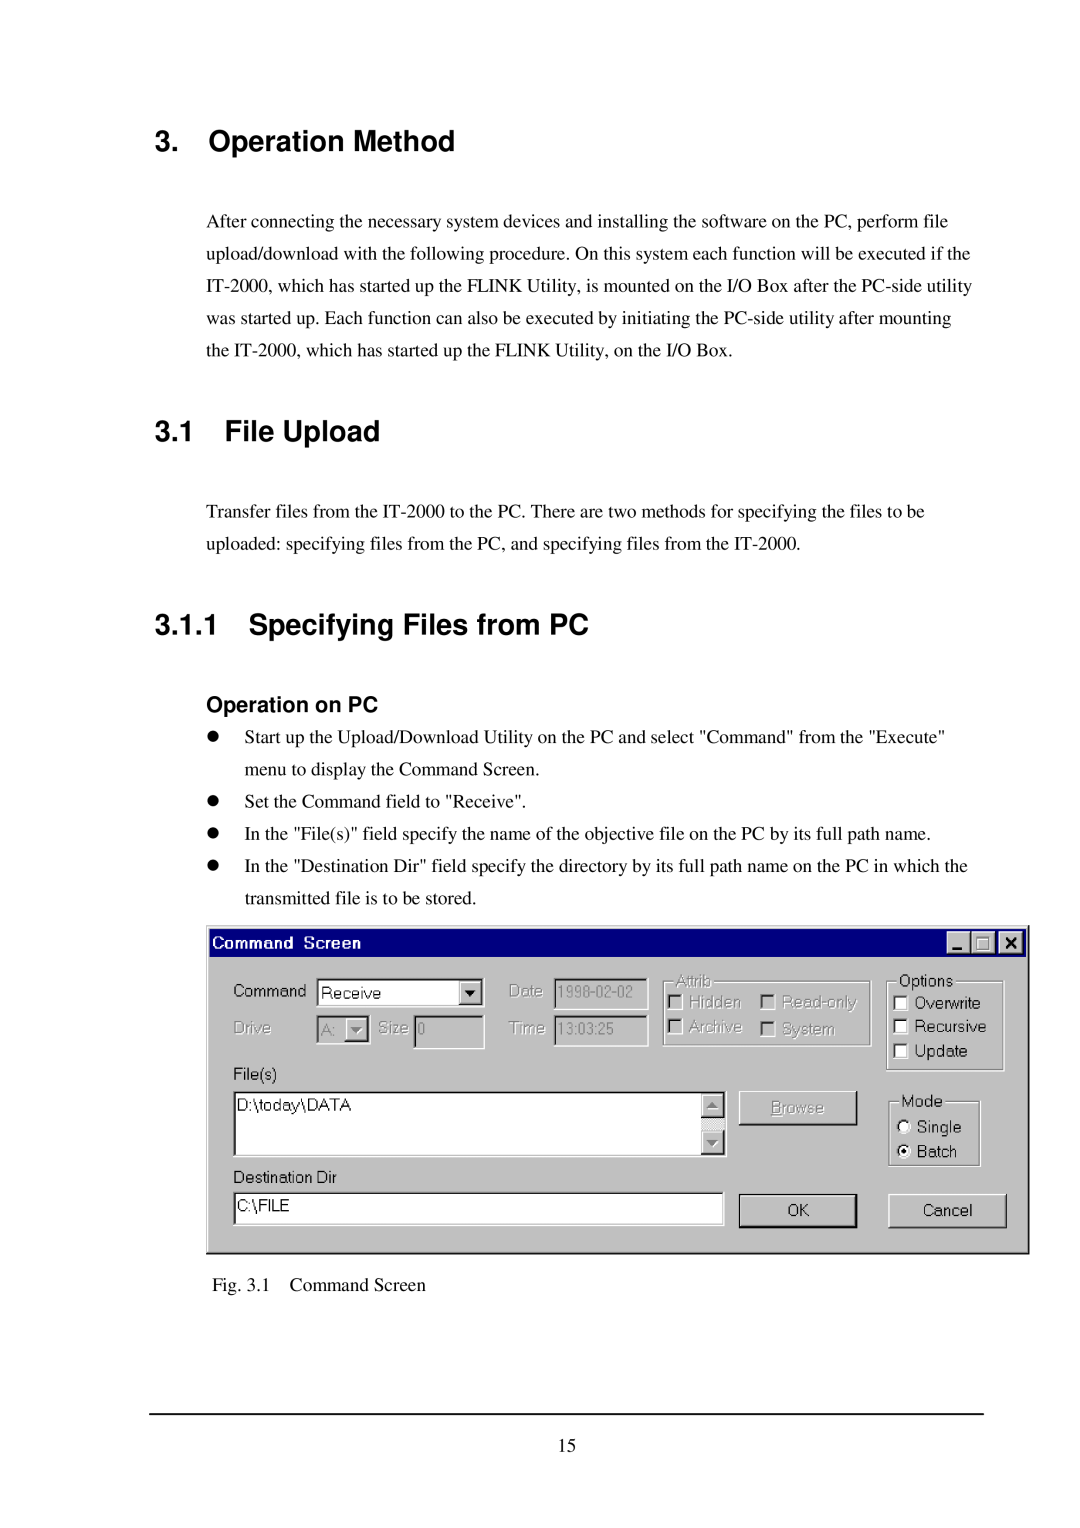 Casio IT-2000 installation manual Operation Method, File Upload, Specifying Files from PC, Operation on PC 